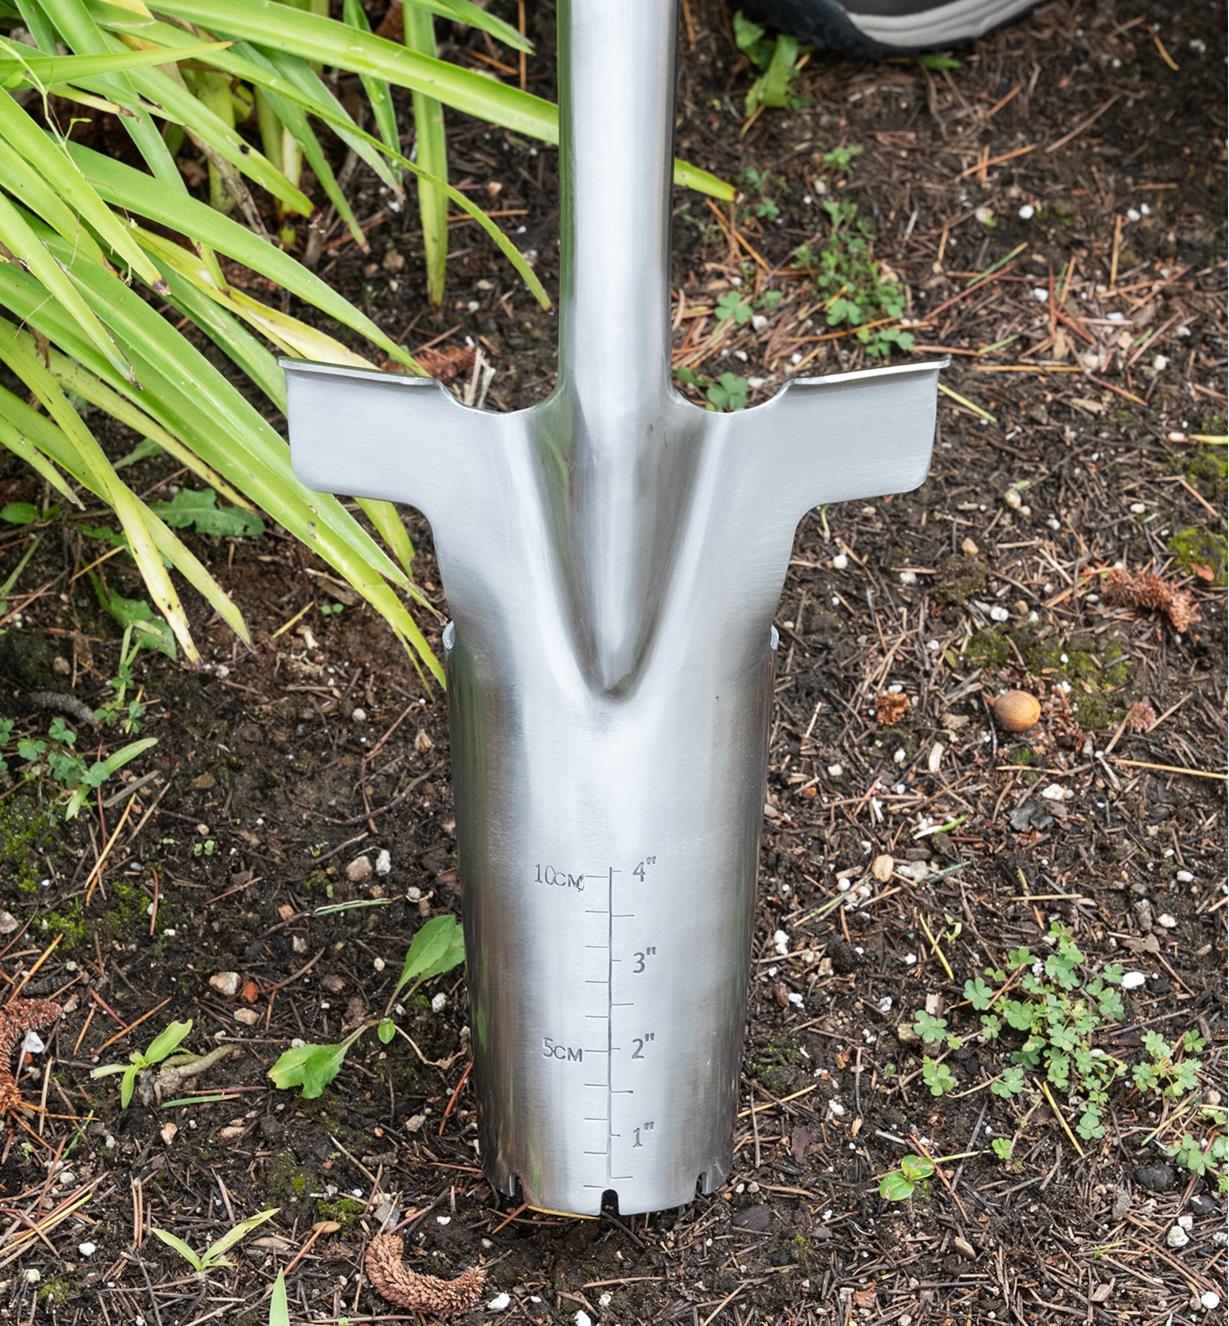 Close-up of the head of the bulb planter showing measurement markings